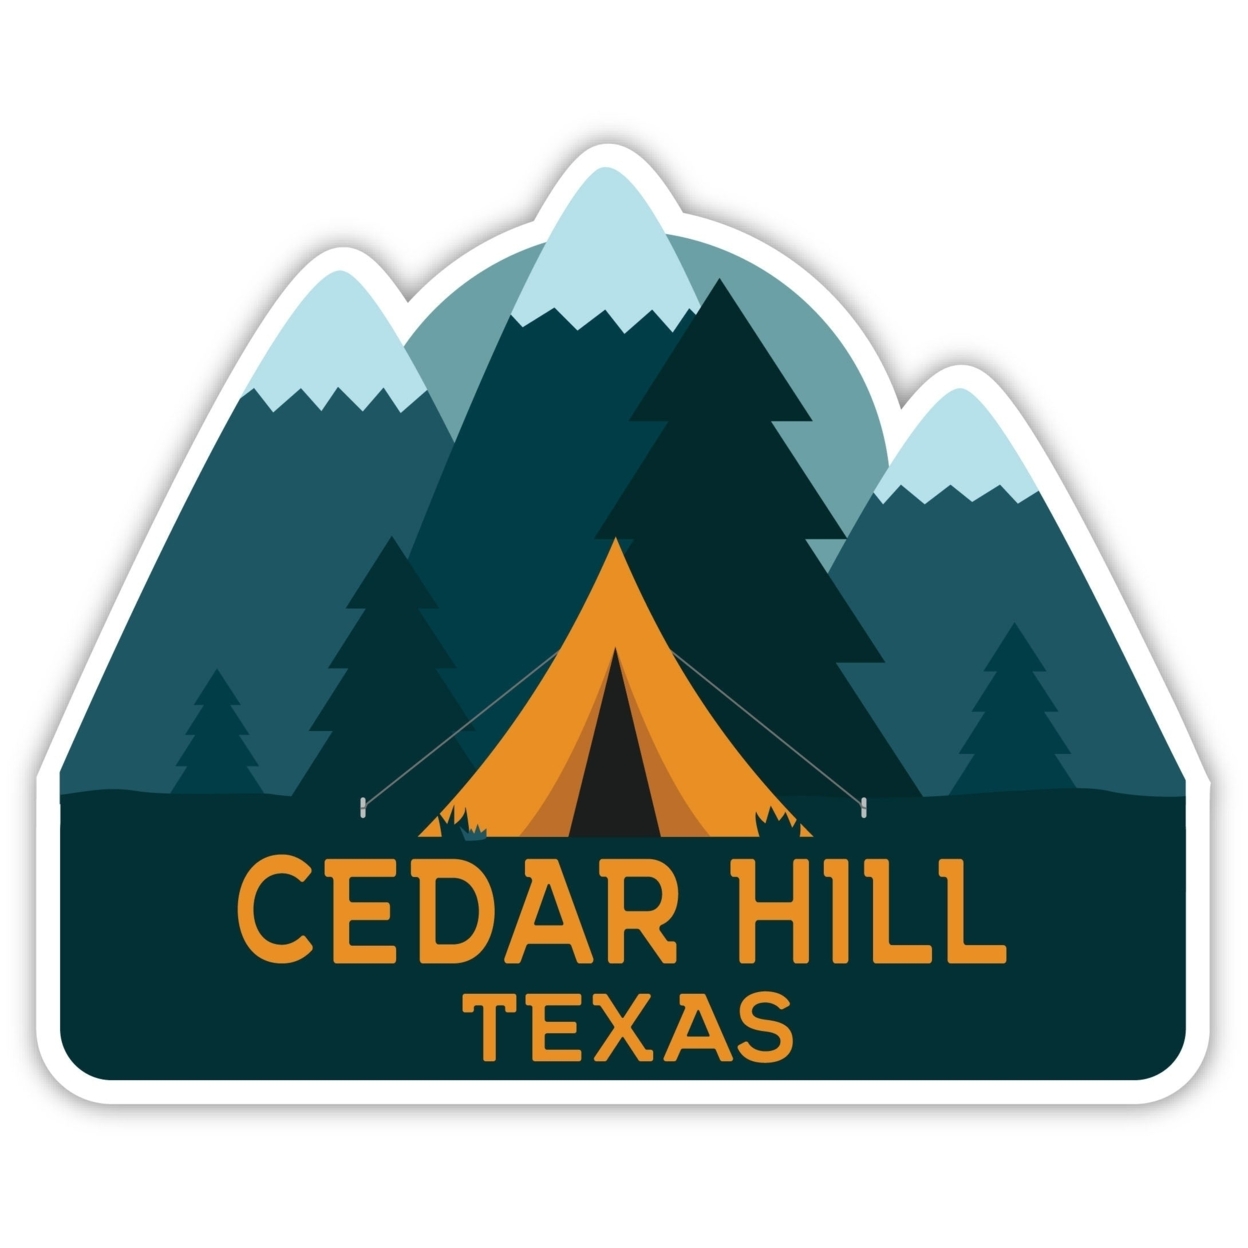 Cedar Hill Texas Souvenir Decorative Stickers (Choose Theme And Size) - 4-Pack, 4-Inch, Tent